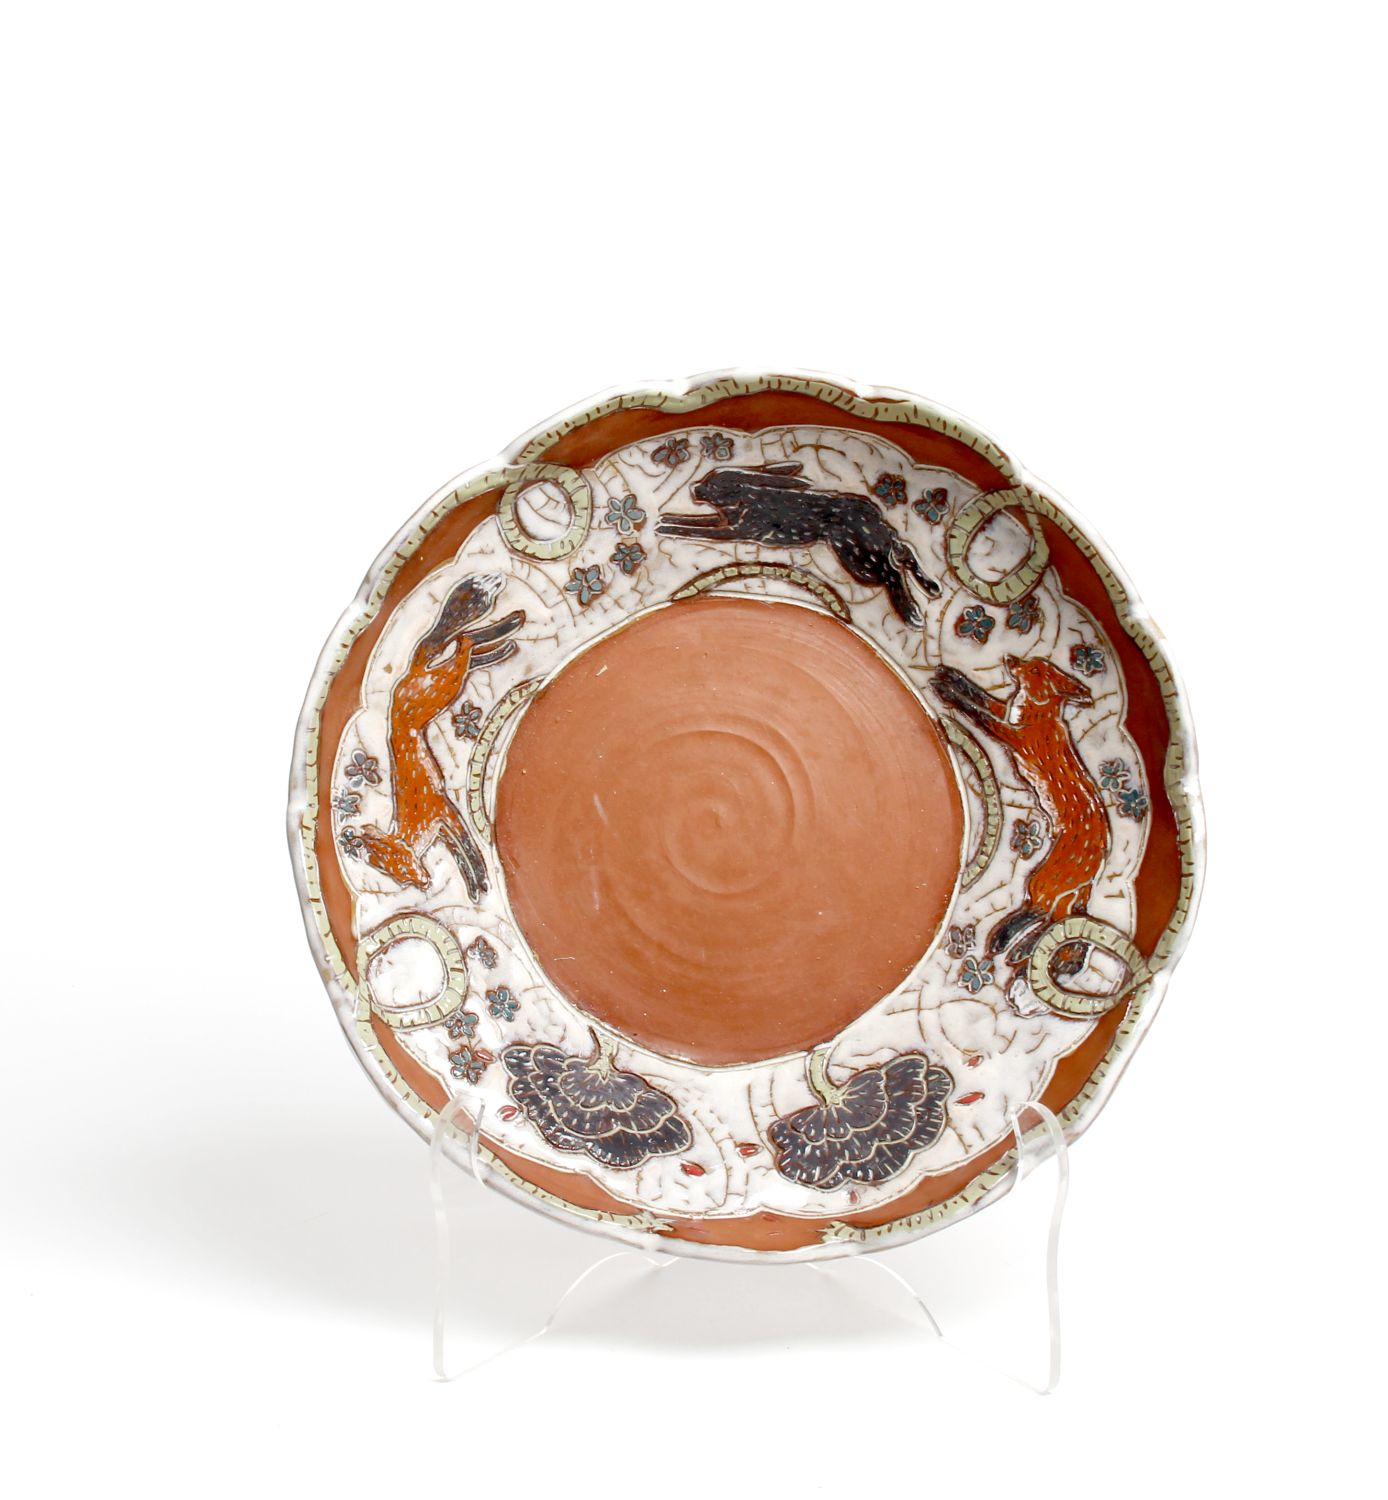 Zoe Pinnell: Fox Serving Bowl Product Image 1 of 4